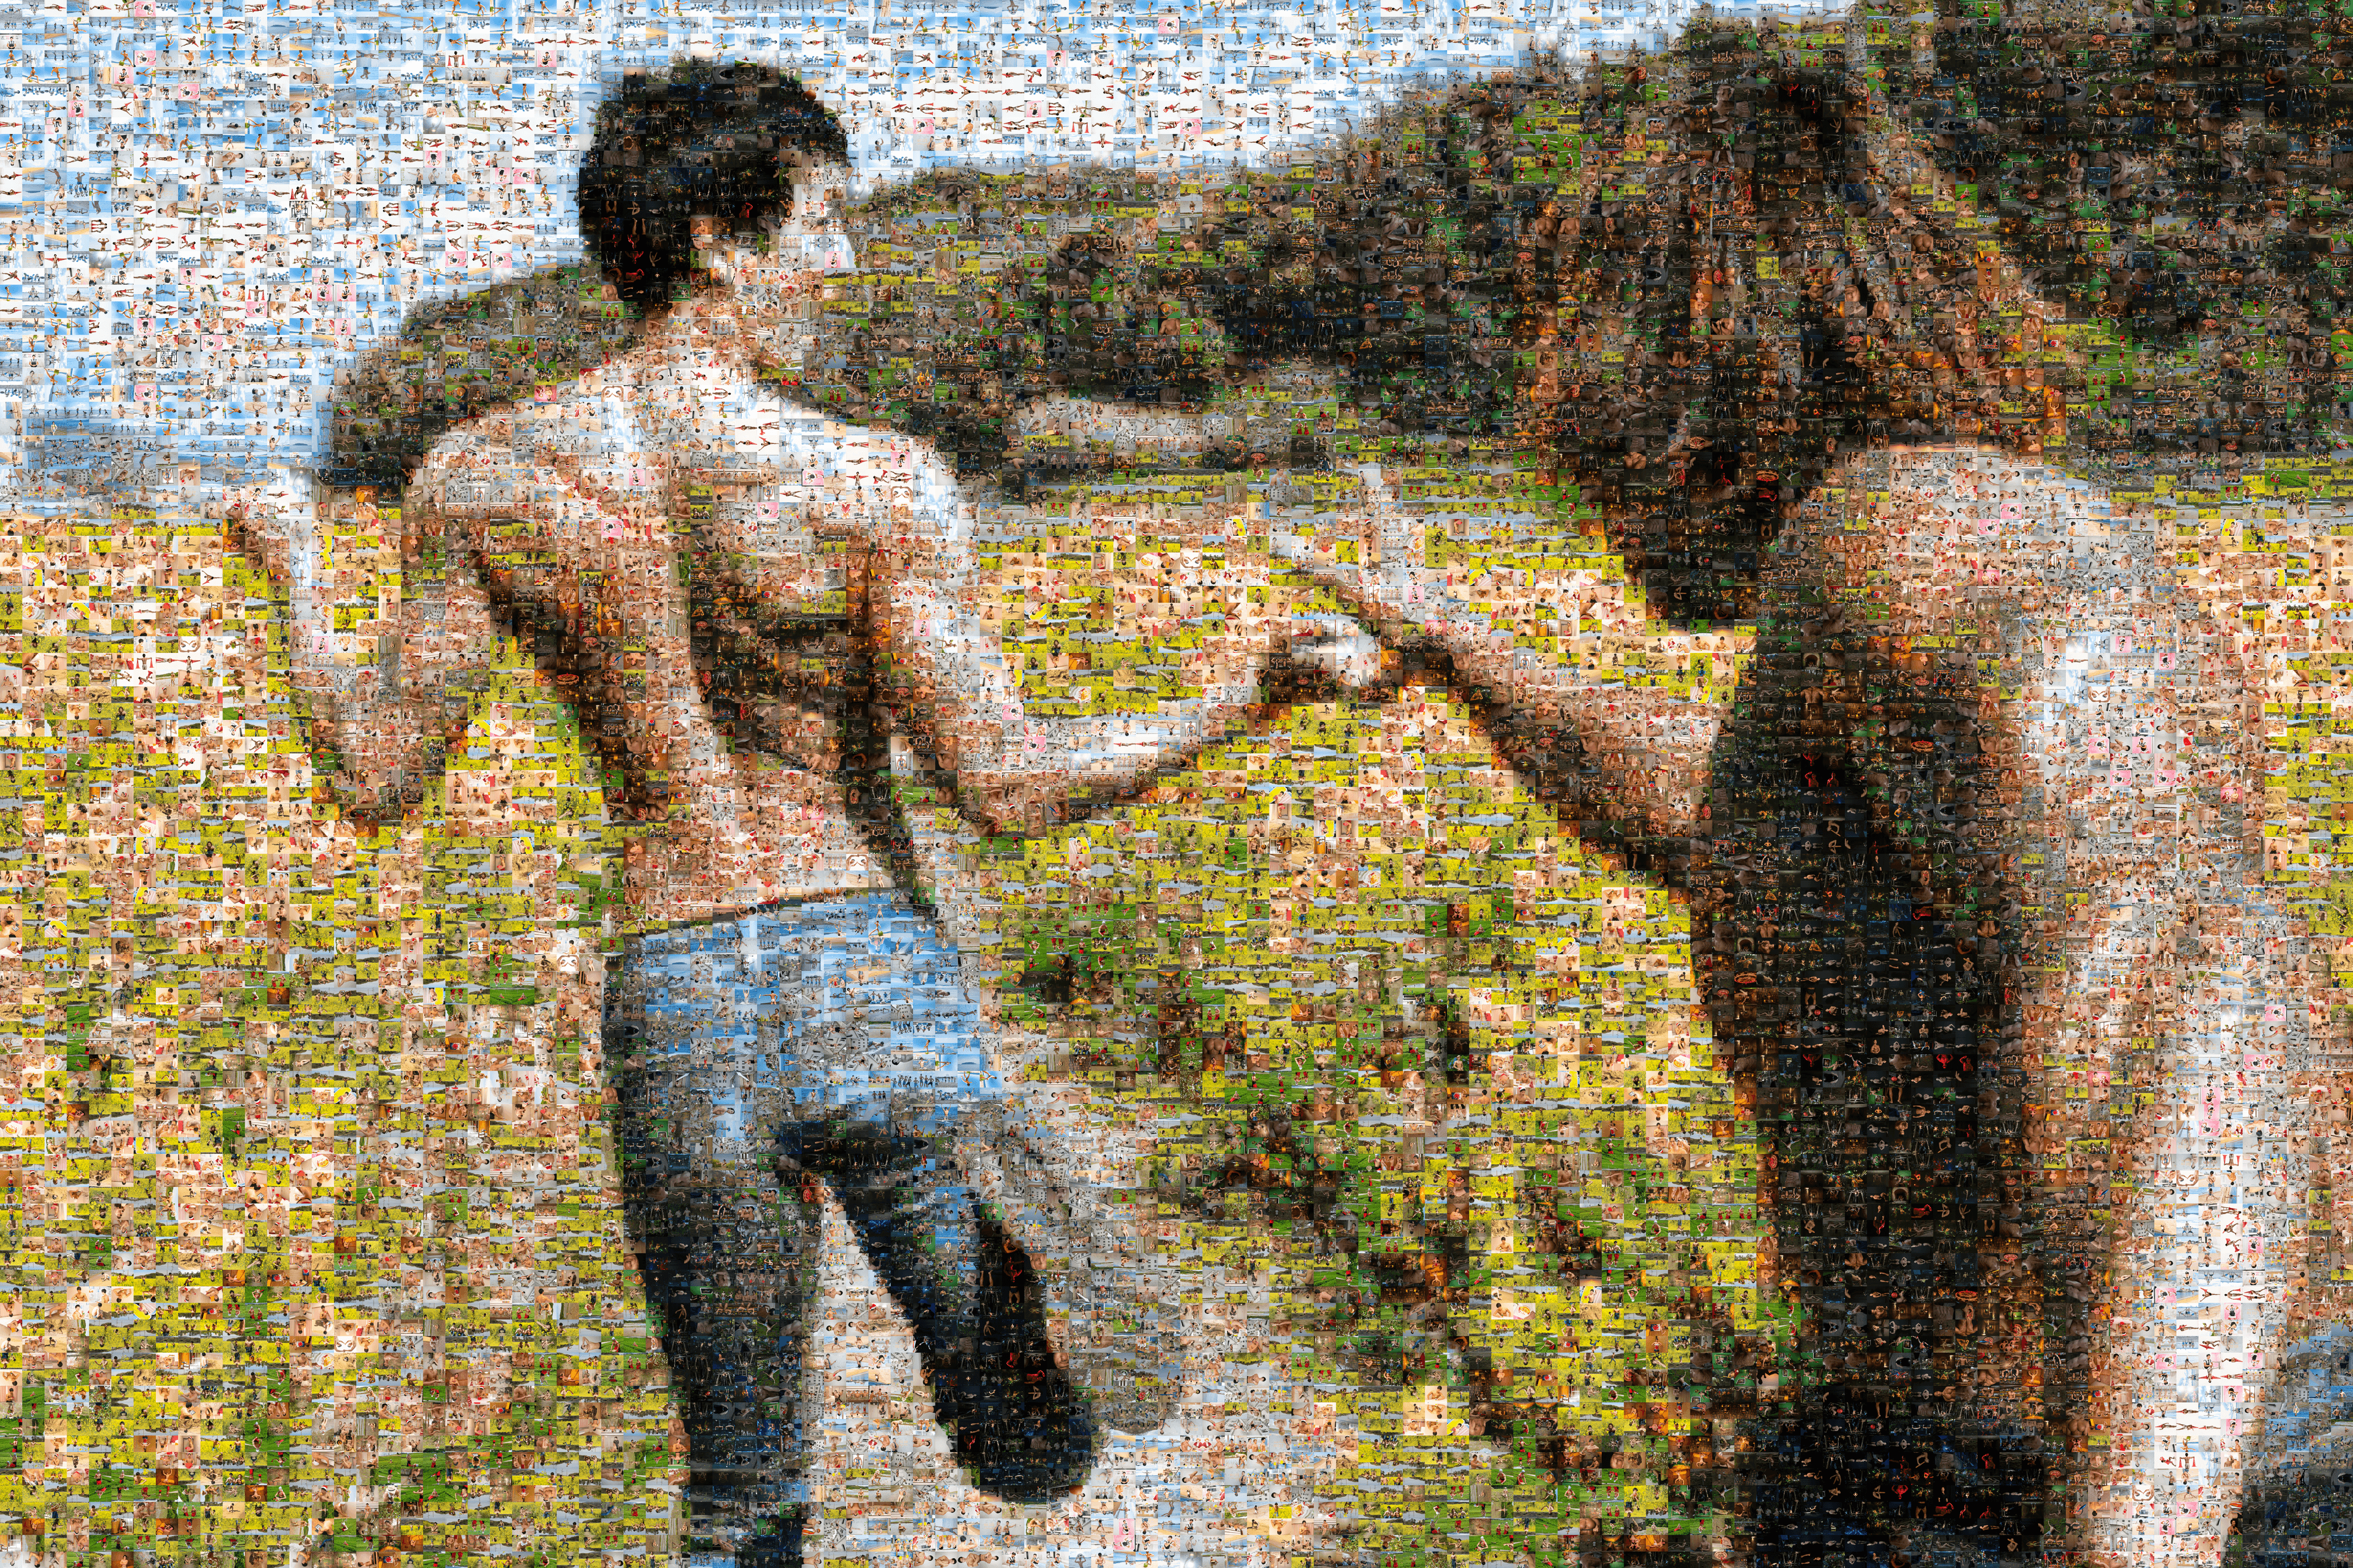 Muscle Mosaic #1 "The catcher of muscle in the canola flower"